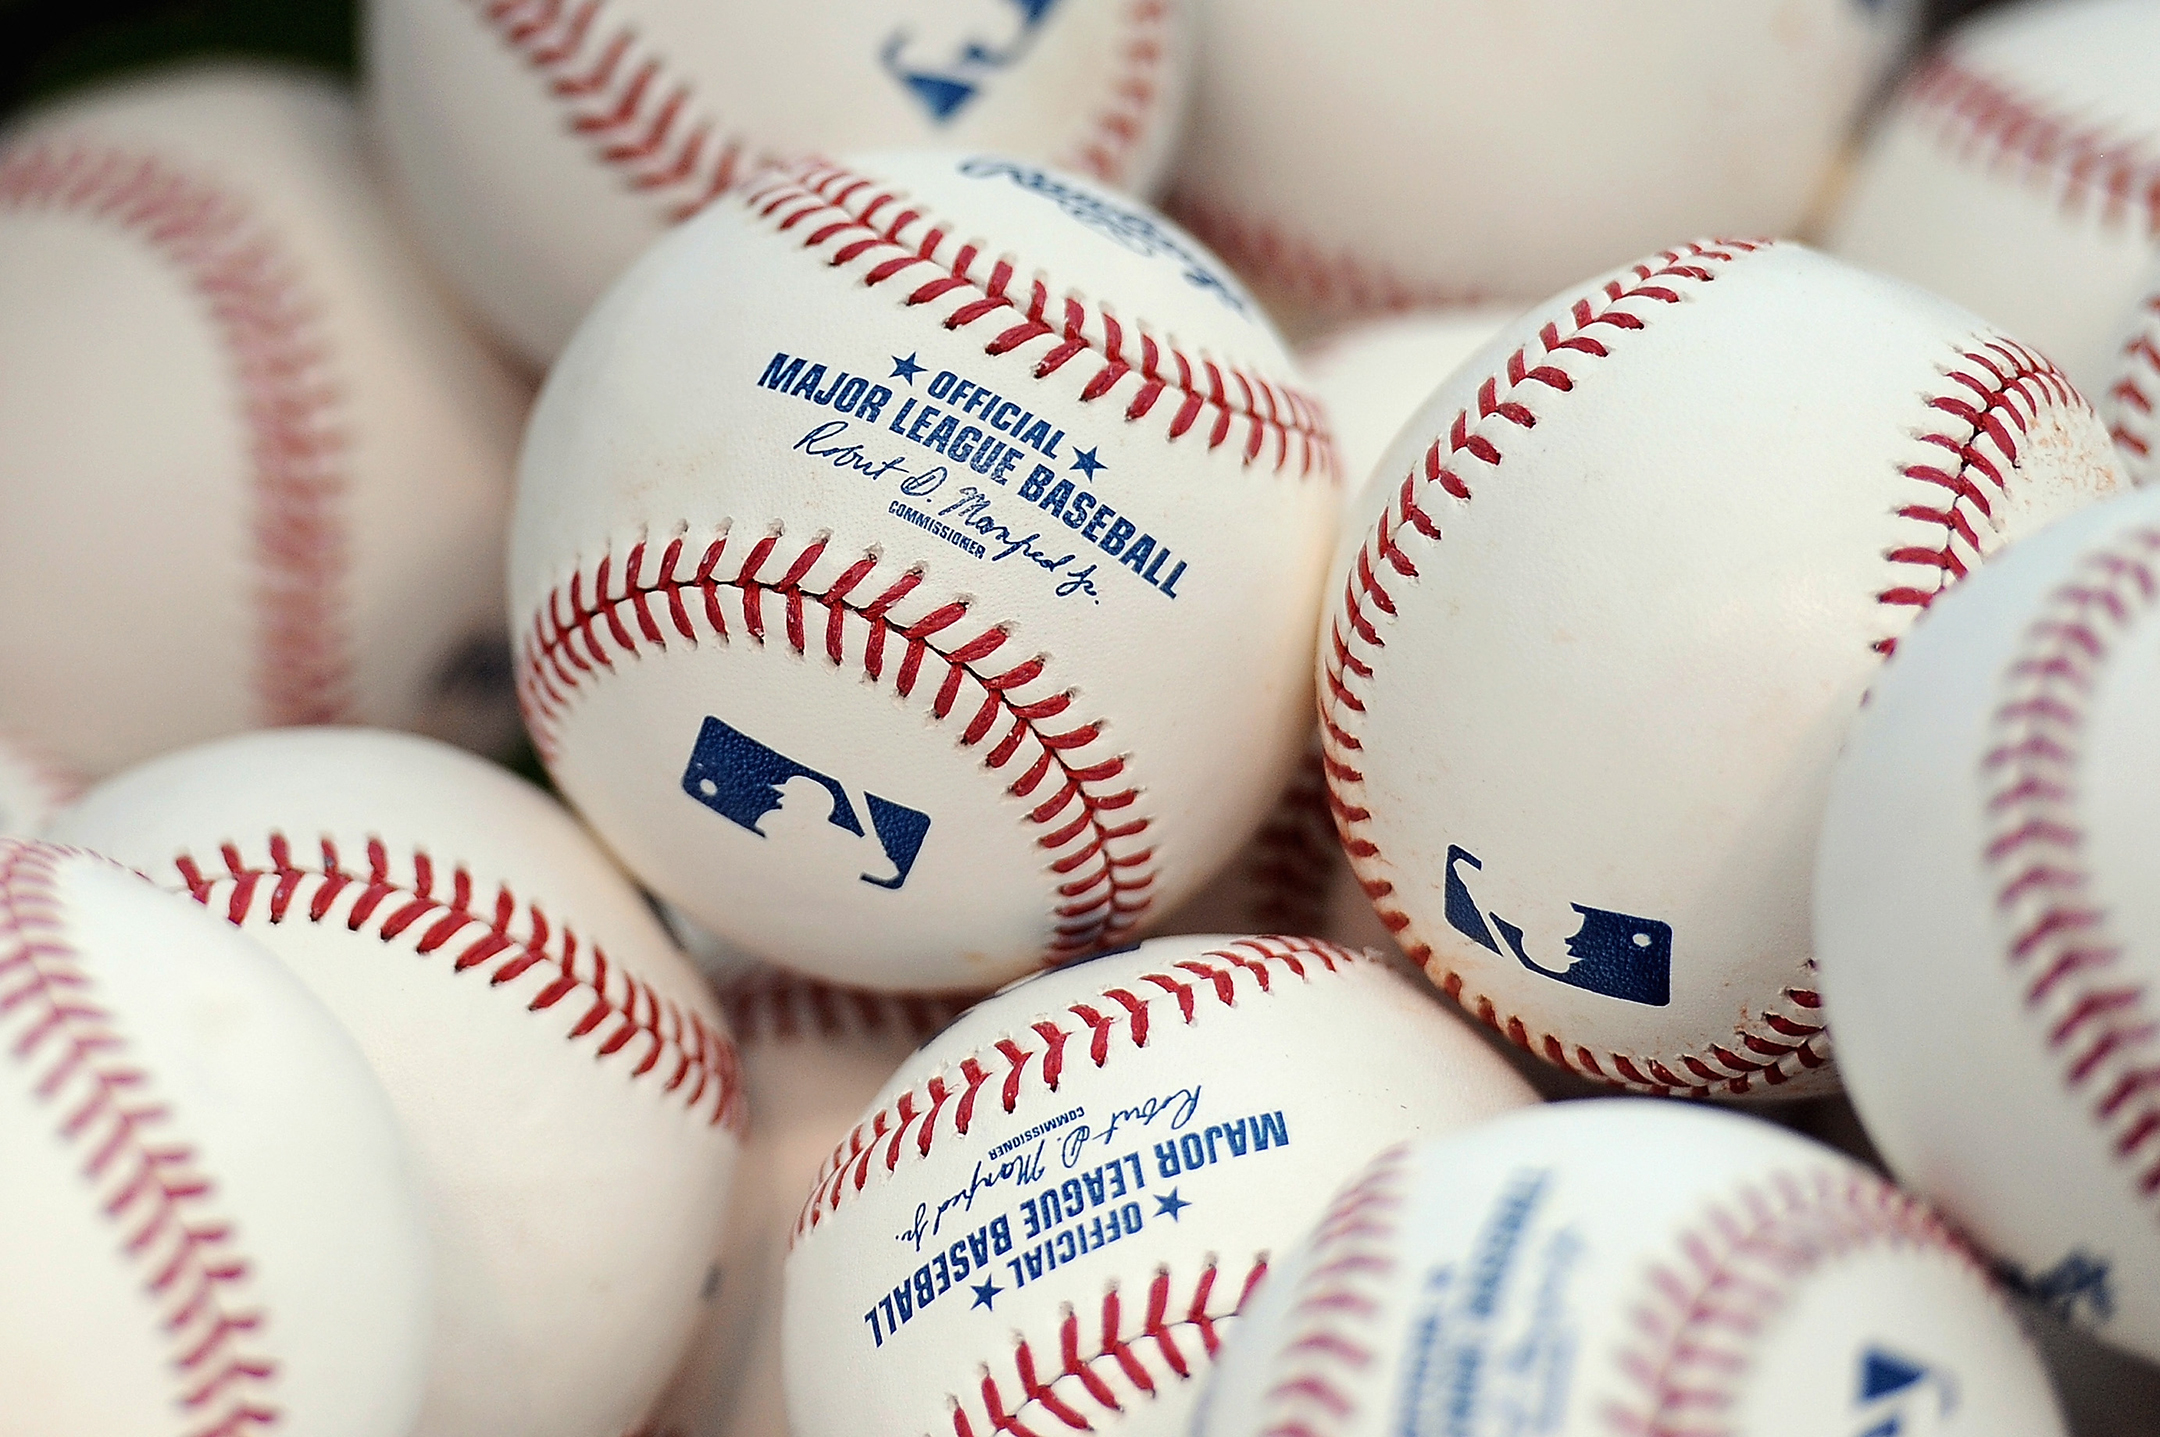 A detail shot of major league baseballs prior to a game